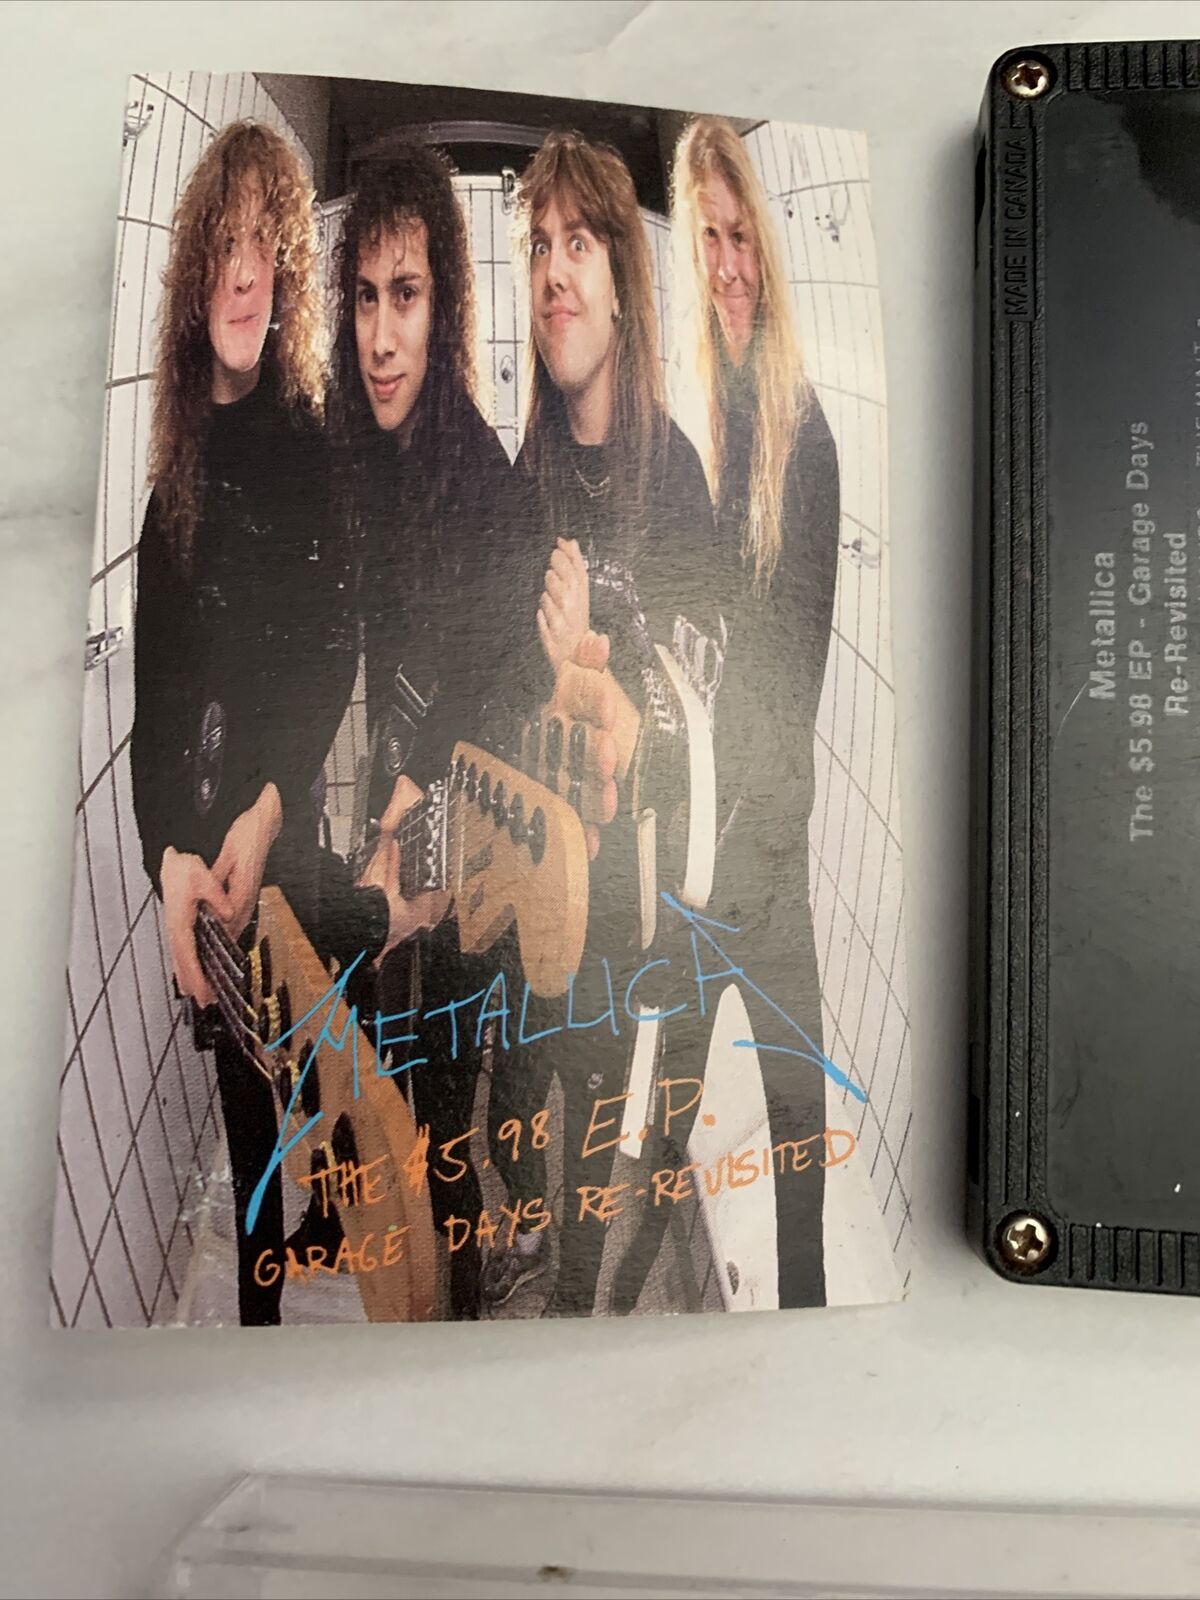 The $5.98 E.P.: Garage Days Re-Revisited by Metallica (Cassette, 1987,...